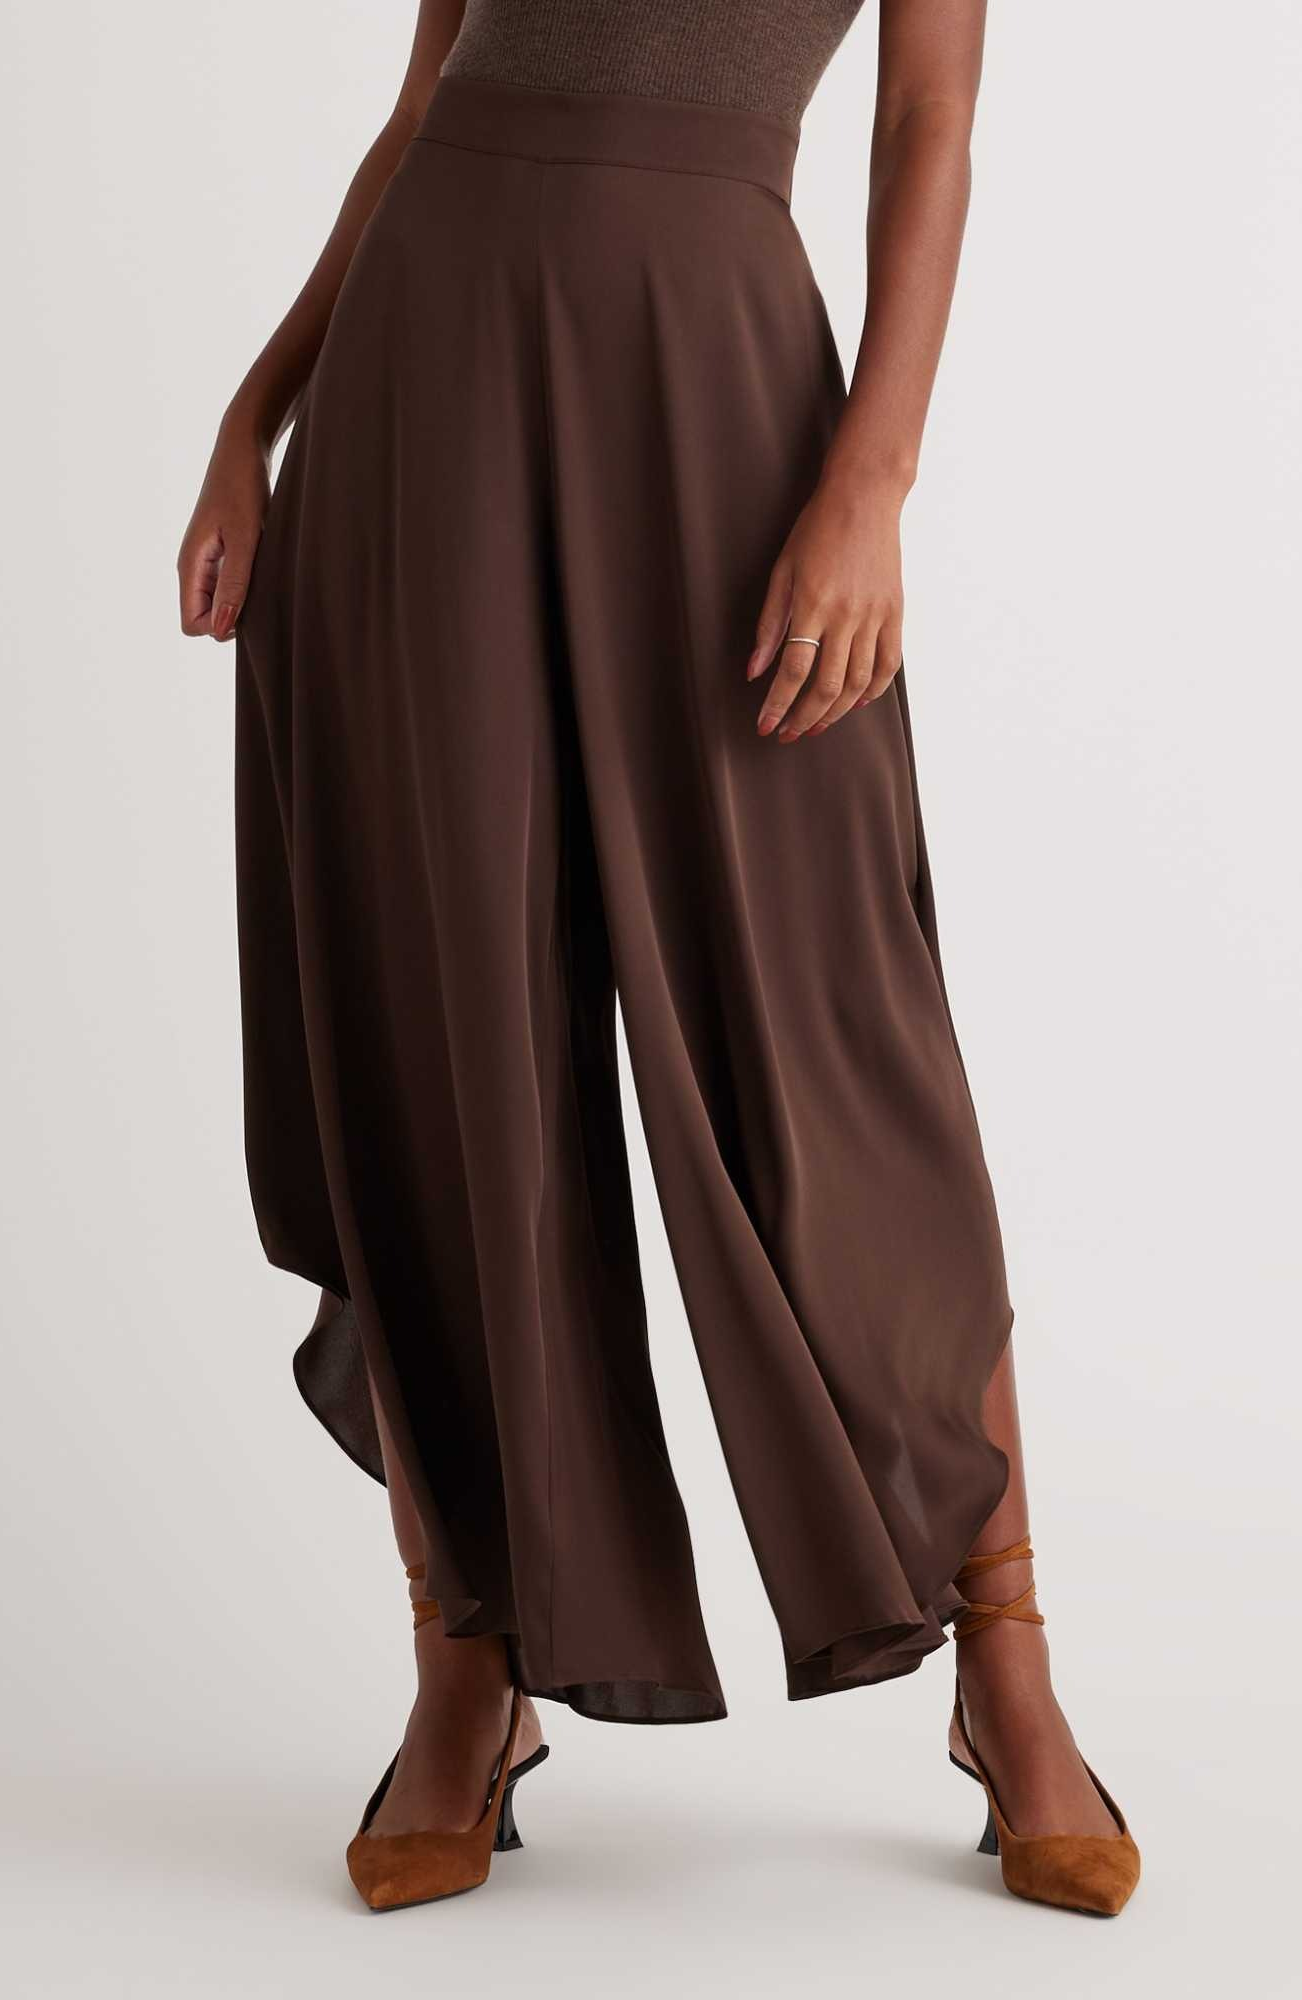 Anrabess Palazzo Pants Are Essential if You're Sick of Jeans